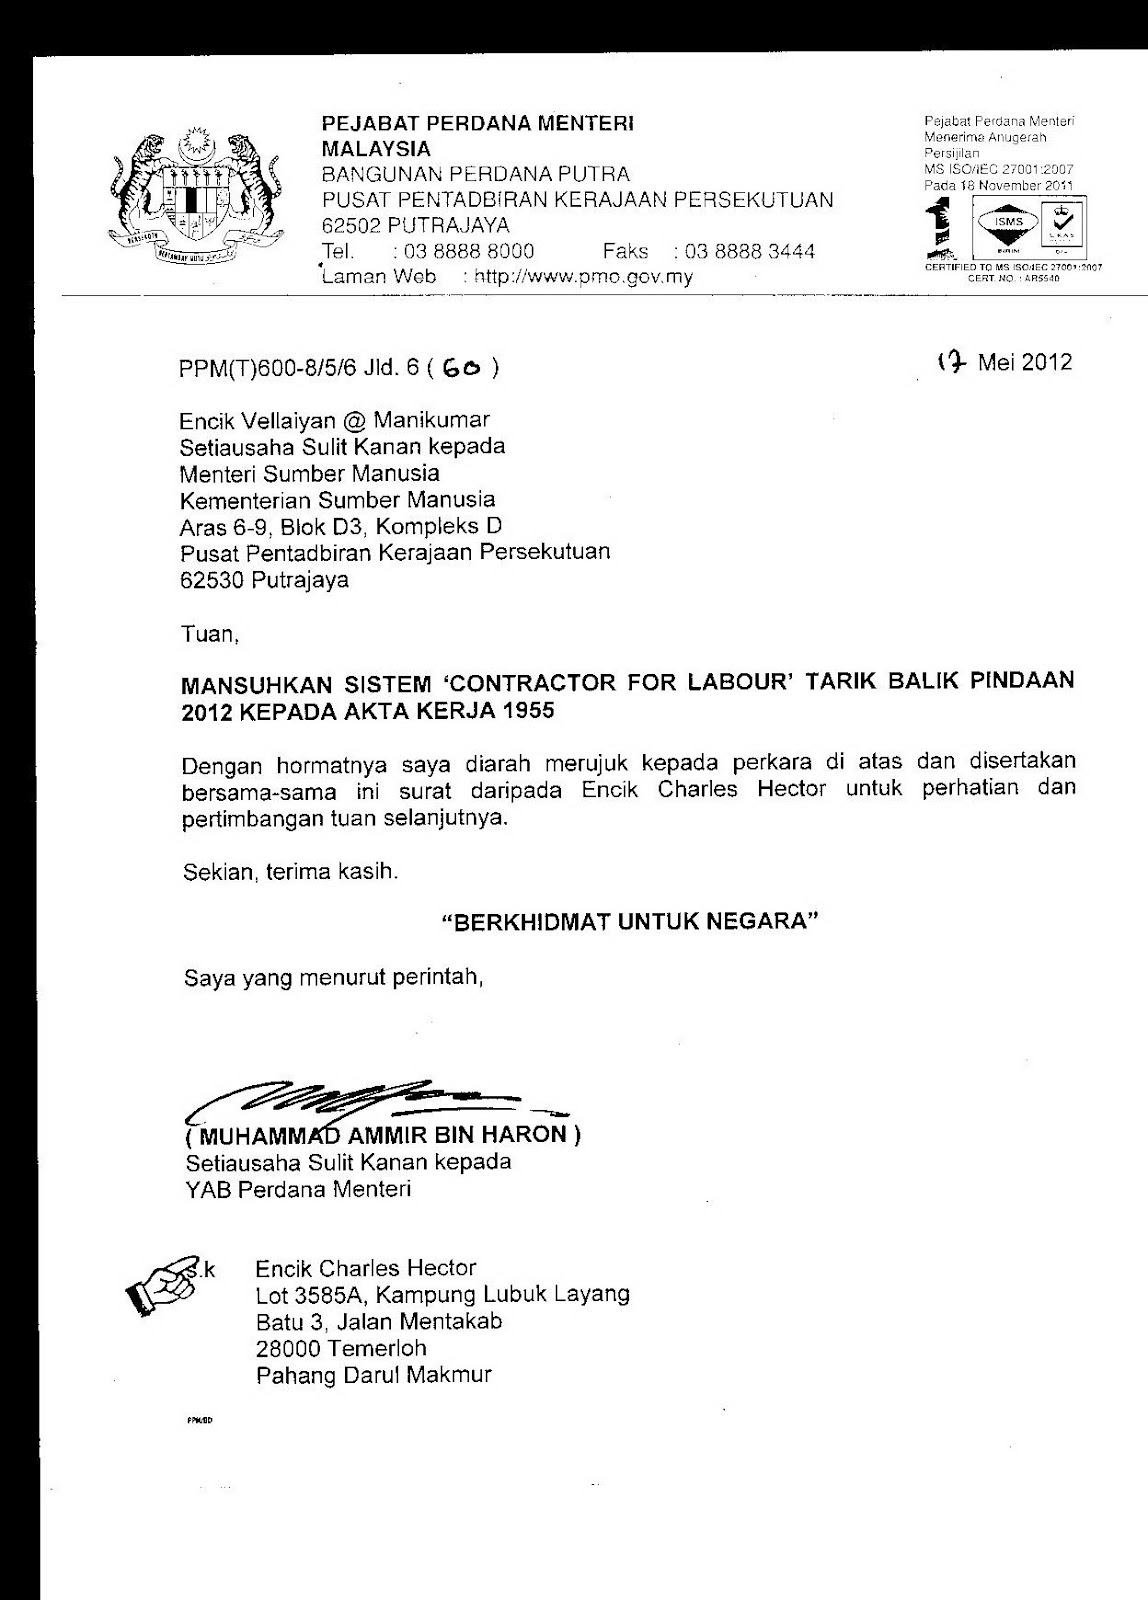 Contoh Offer Letter Bahasa Malaysia - sample letter in 